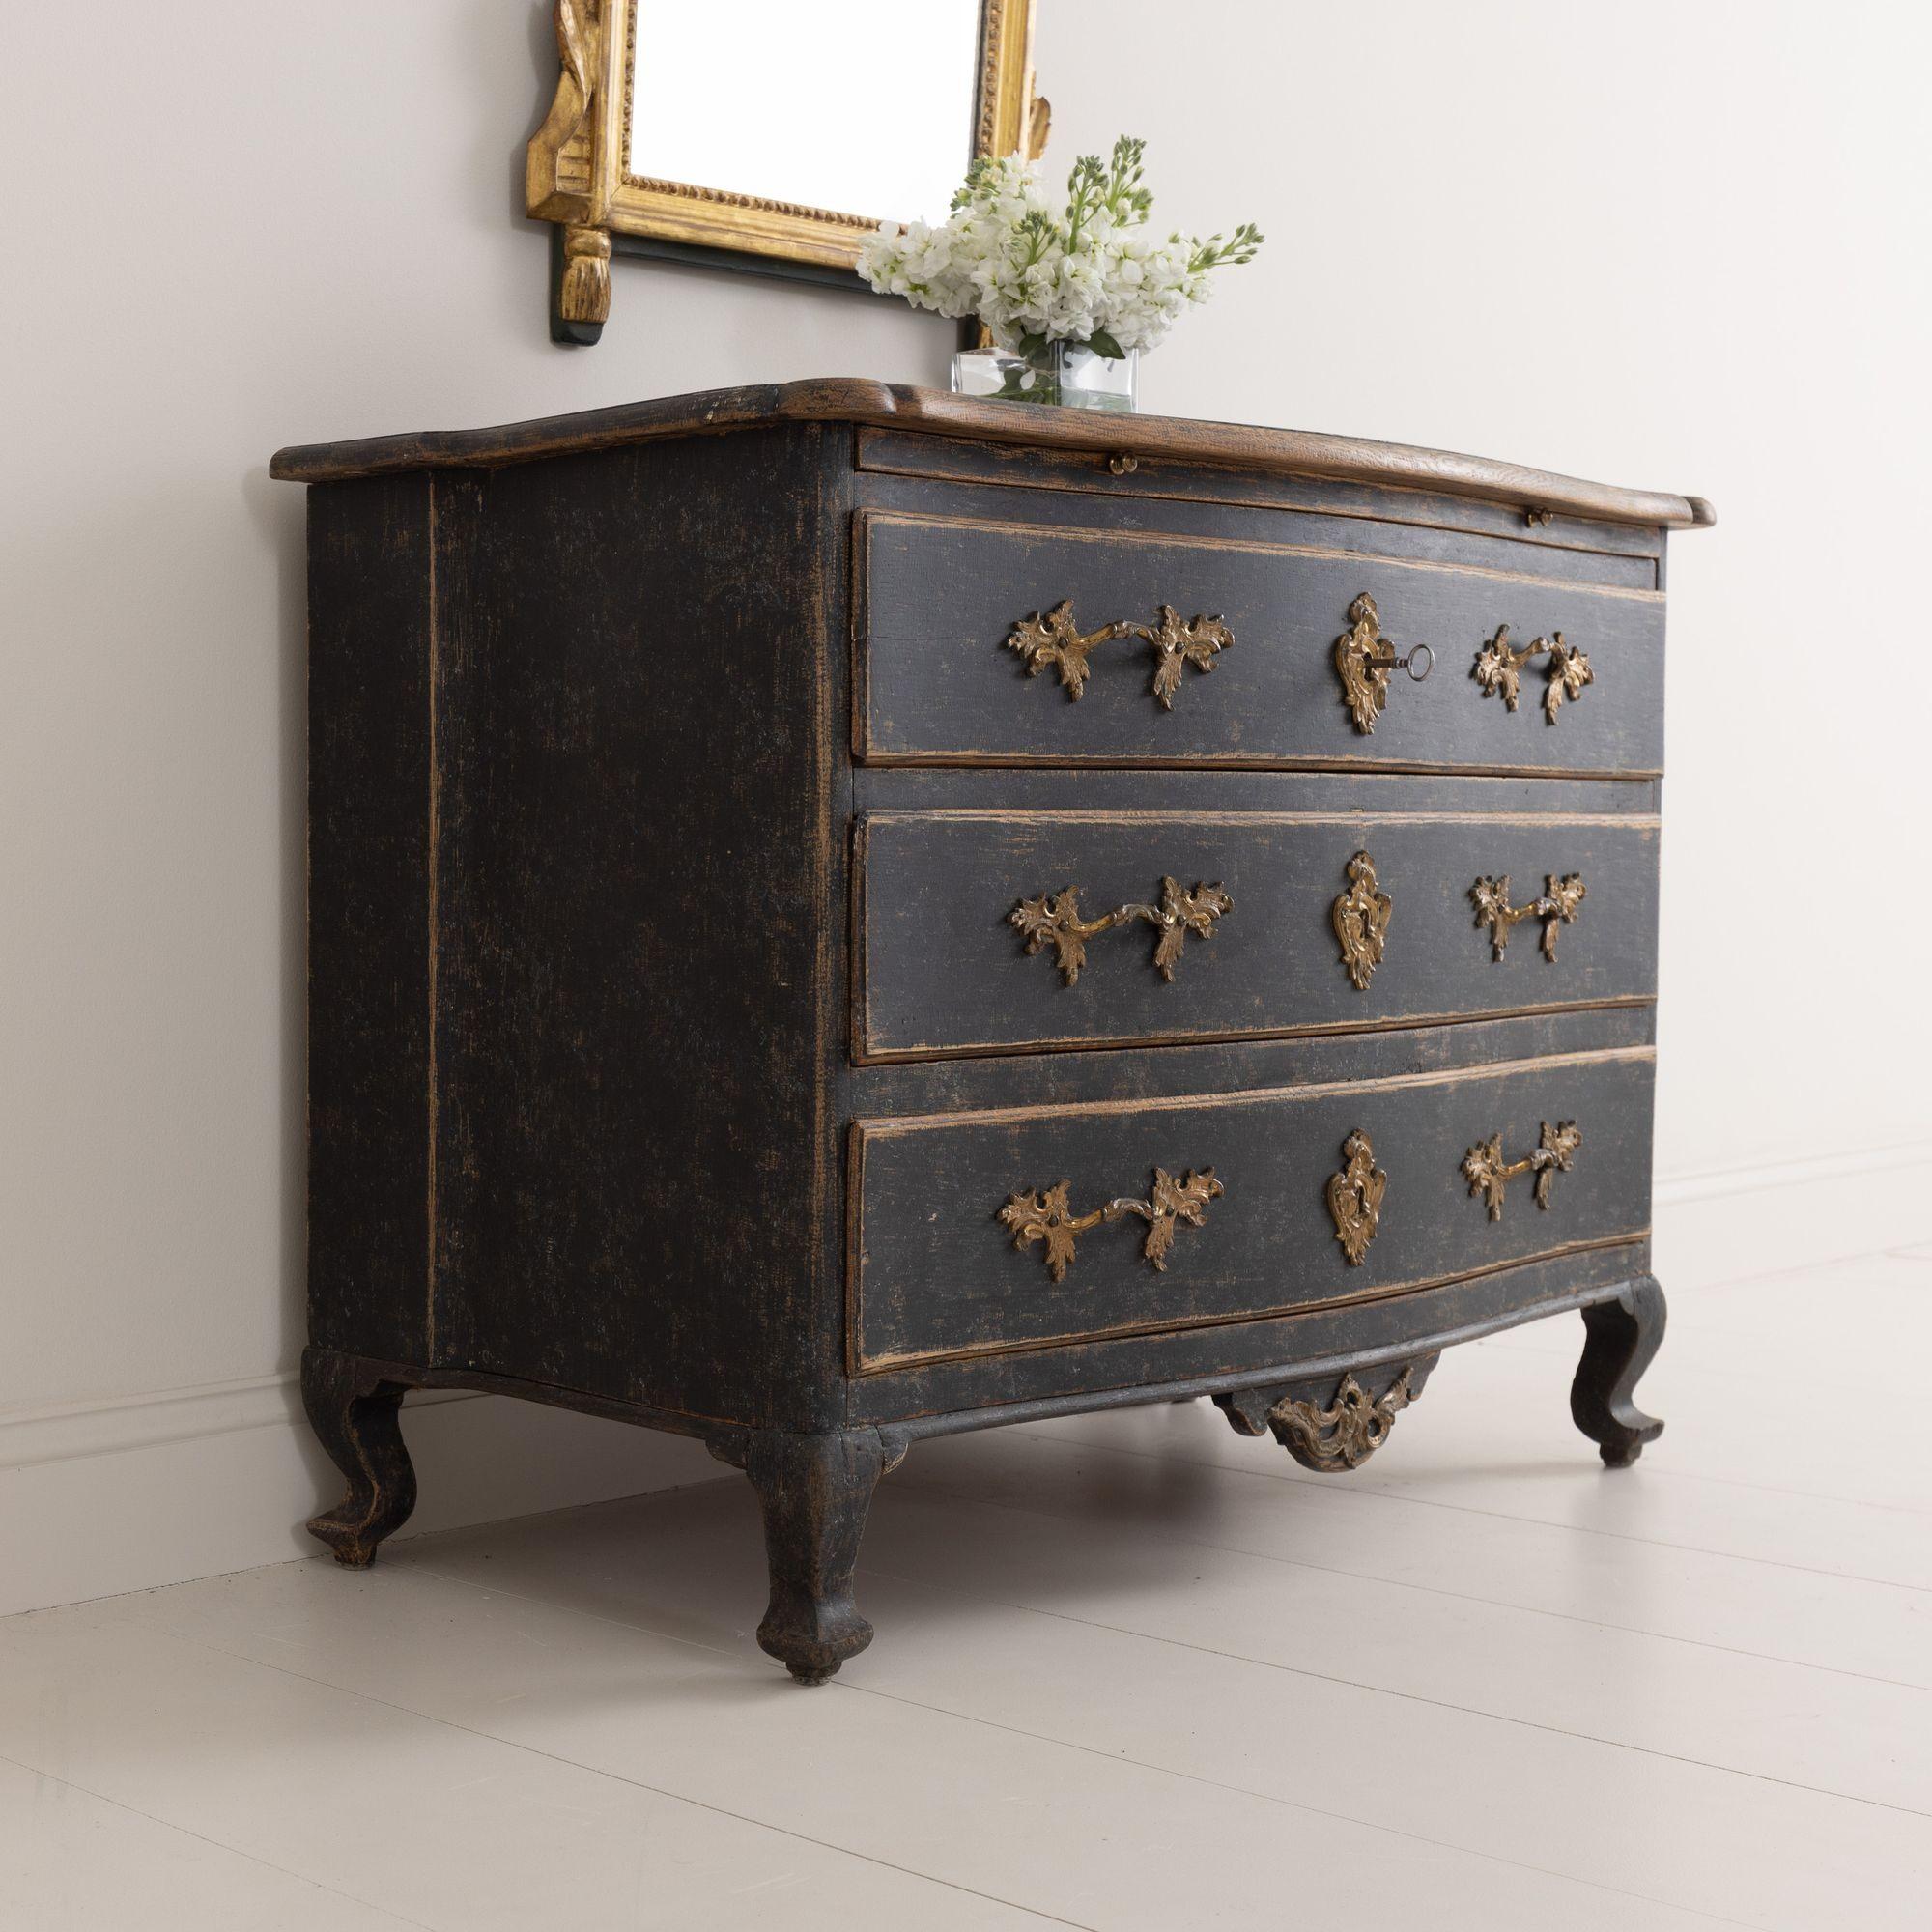 18th C. Swedish Rococo Period Black Painted Commode with Original Brass Hardware For Sale 5